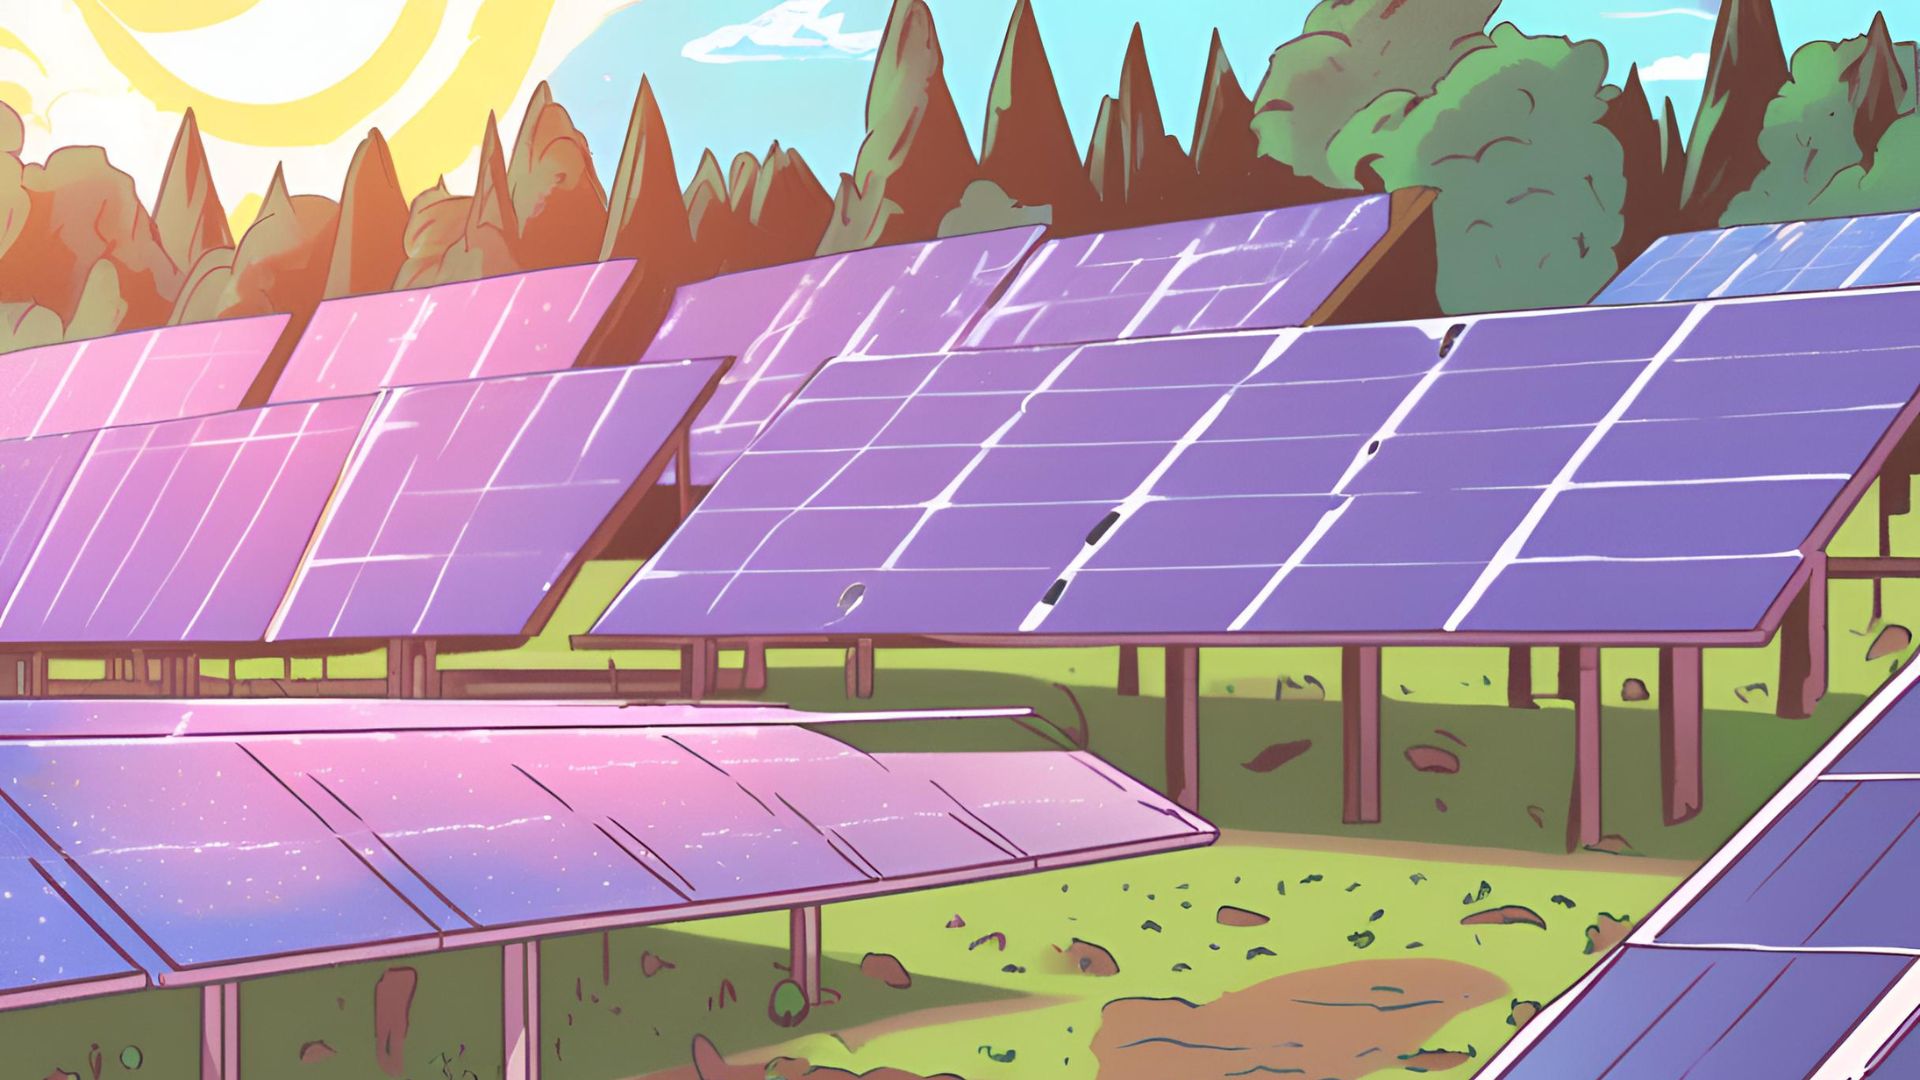 Stateline.org: “Can’t install your own solar panels? Some areas let you join a community project.”